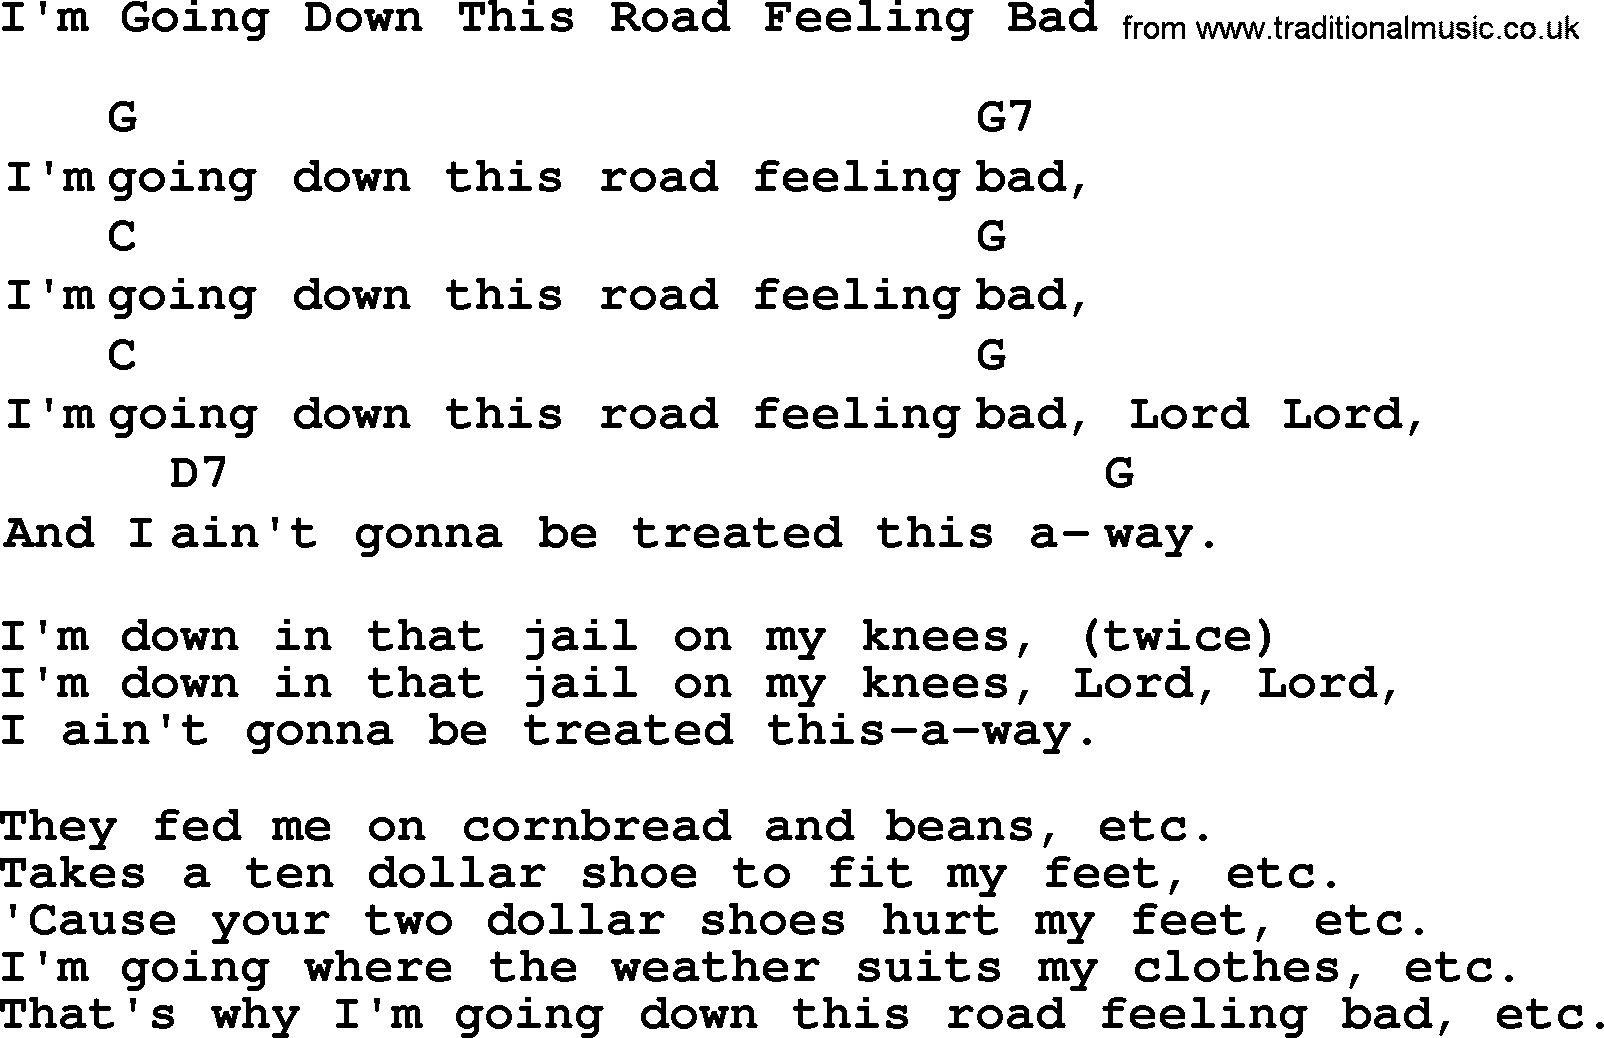 Top 1000 Most Popular Folk and Old-time Songs: Im Going Down This Road Feeling Bad, lyrics and chords